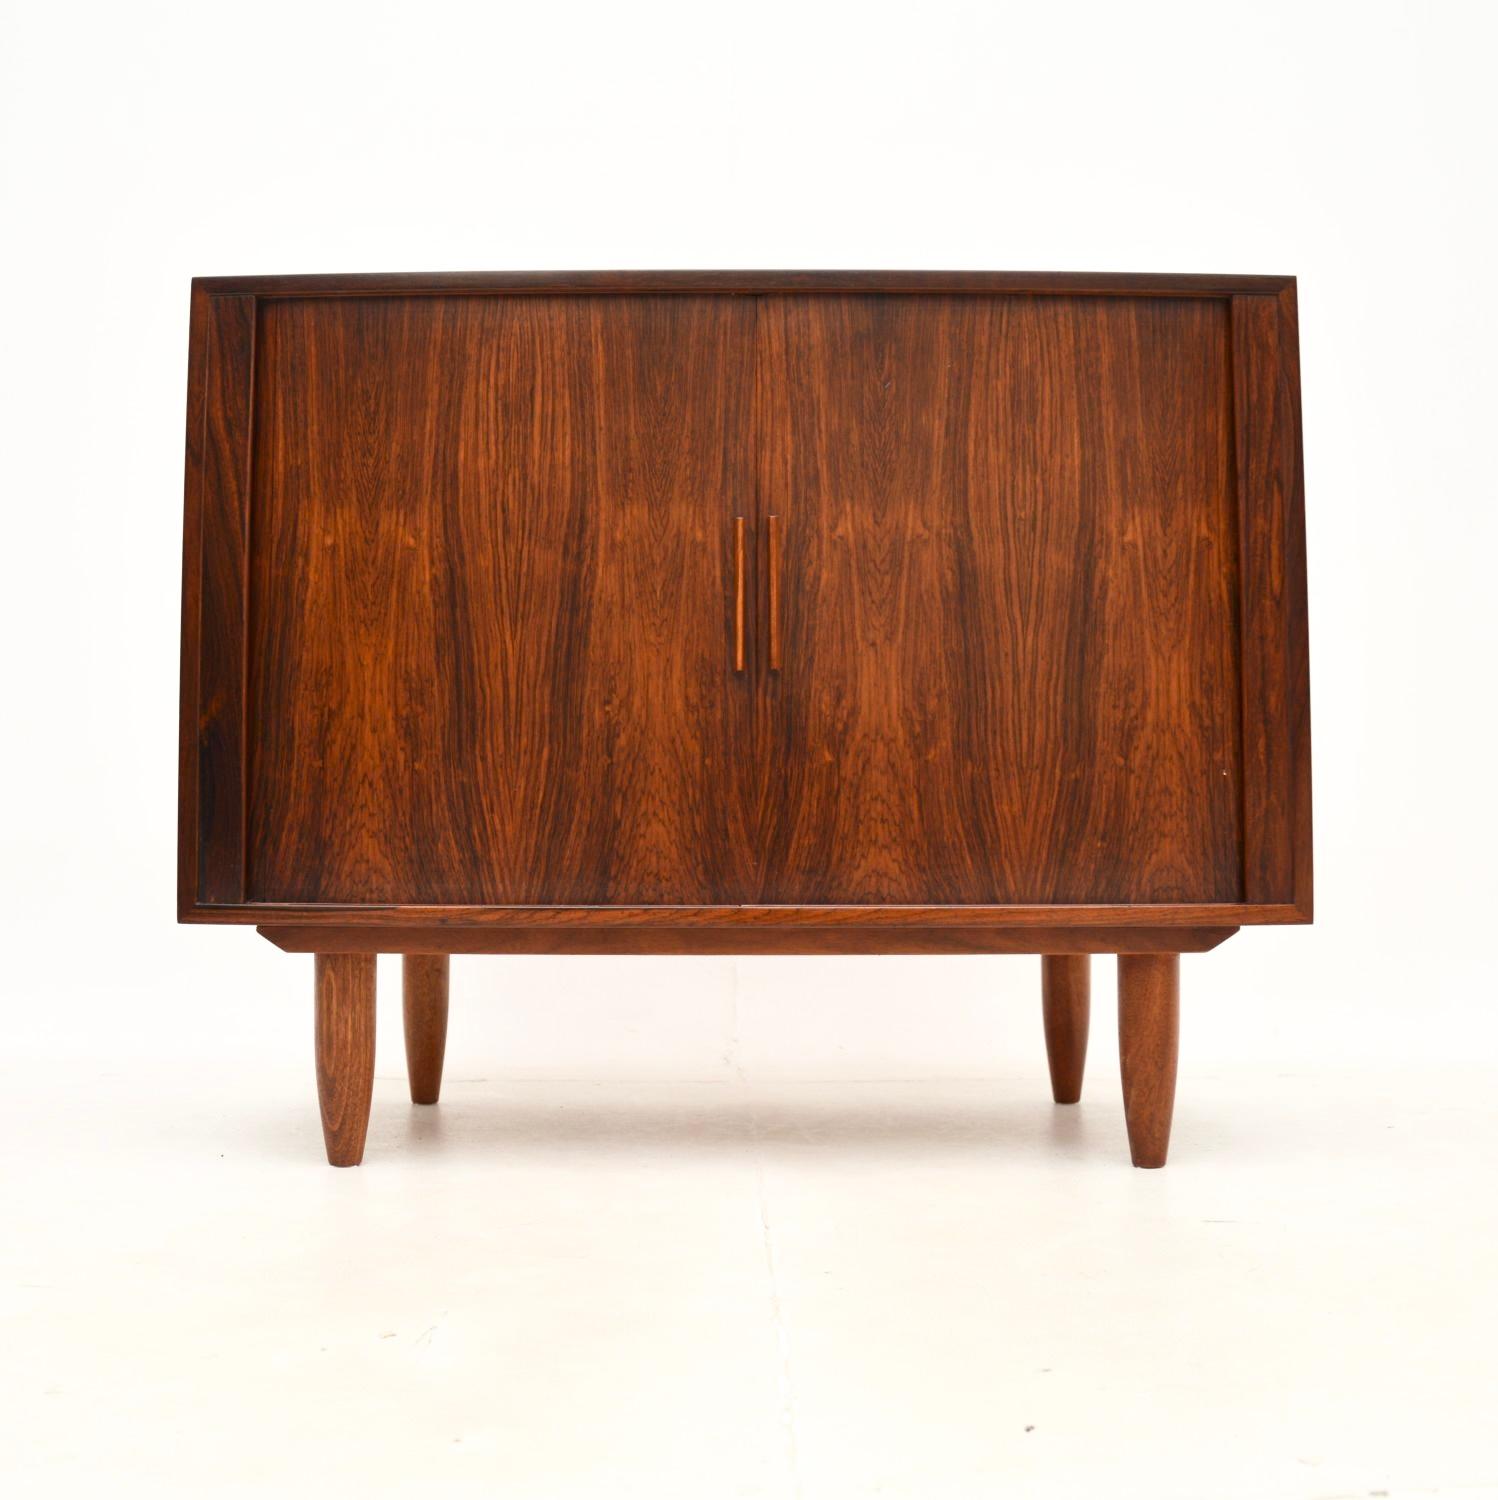 A gorgeous Danish vintage cabinet by Kai Kristiansen, made in Denmark in the 1960’s.

It is of superb quality, with a very stylish and practical design. The colour and grain patterns are beautiful, this looks amazing from all angles. It has